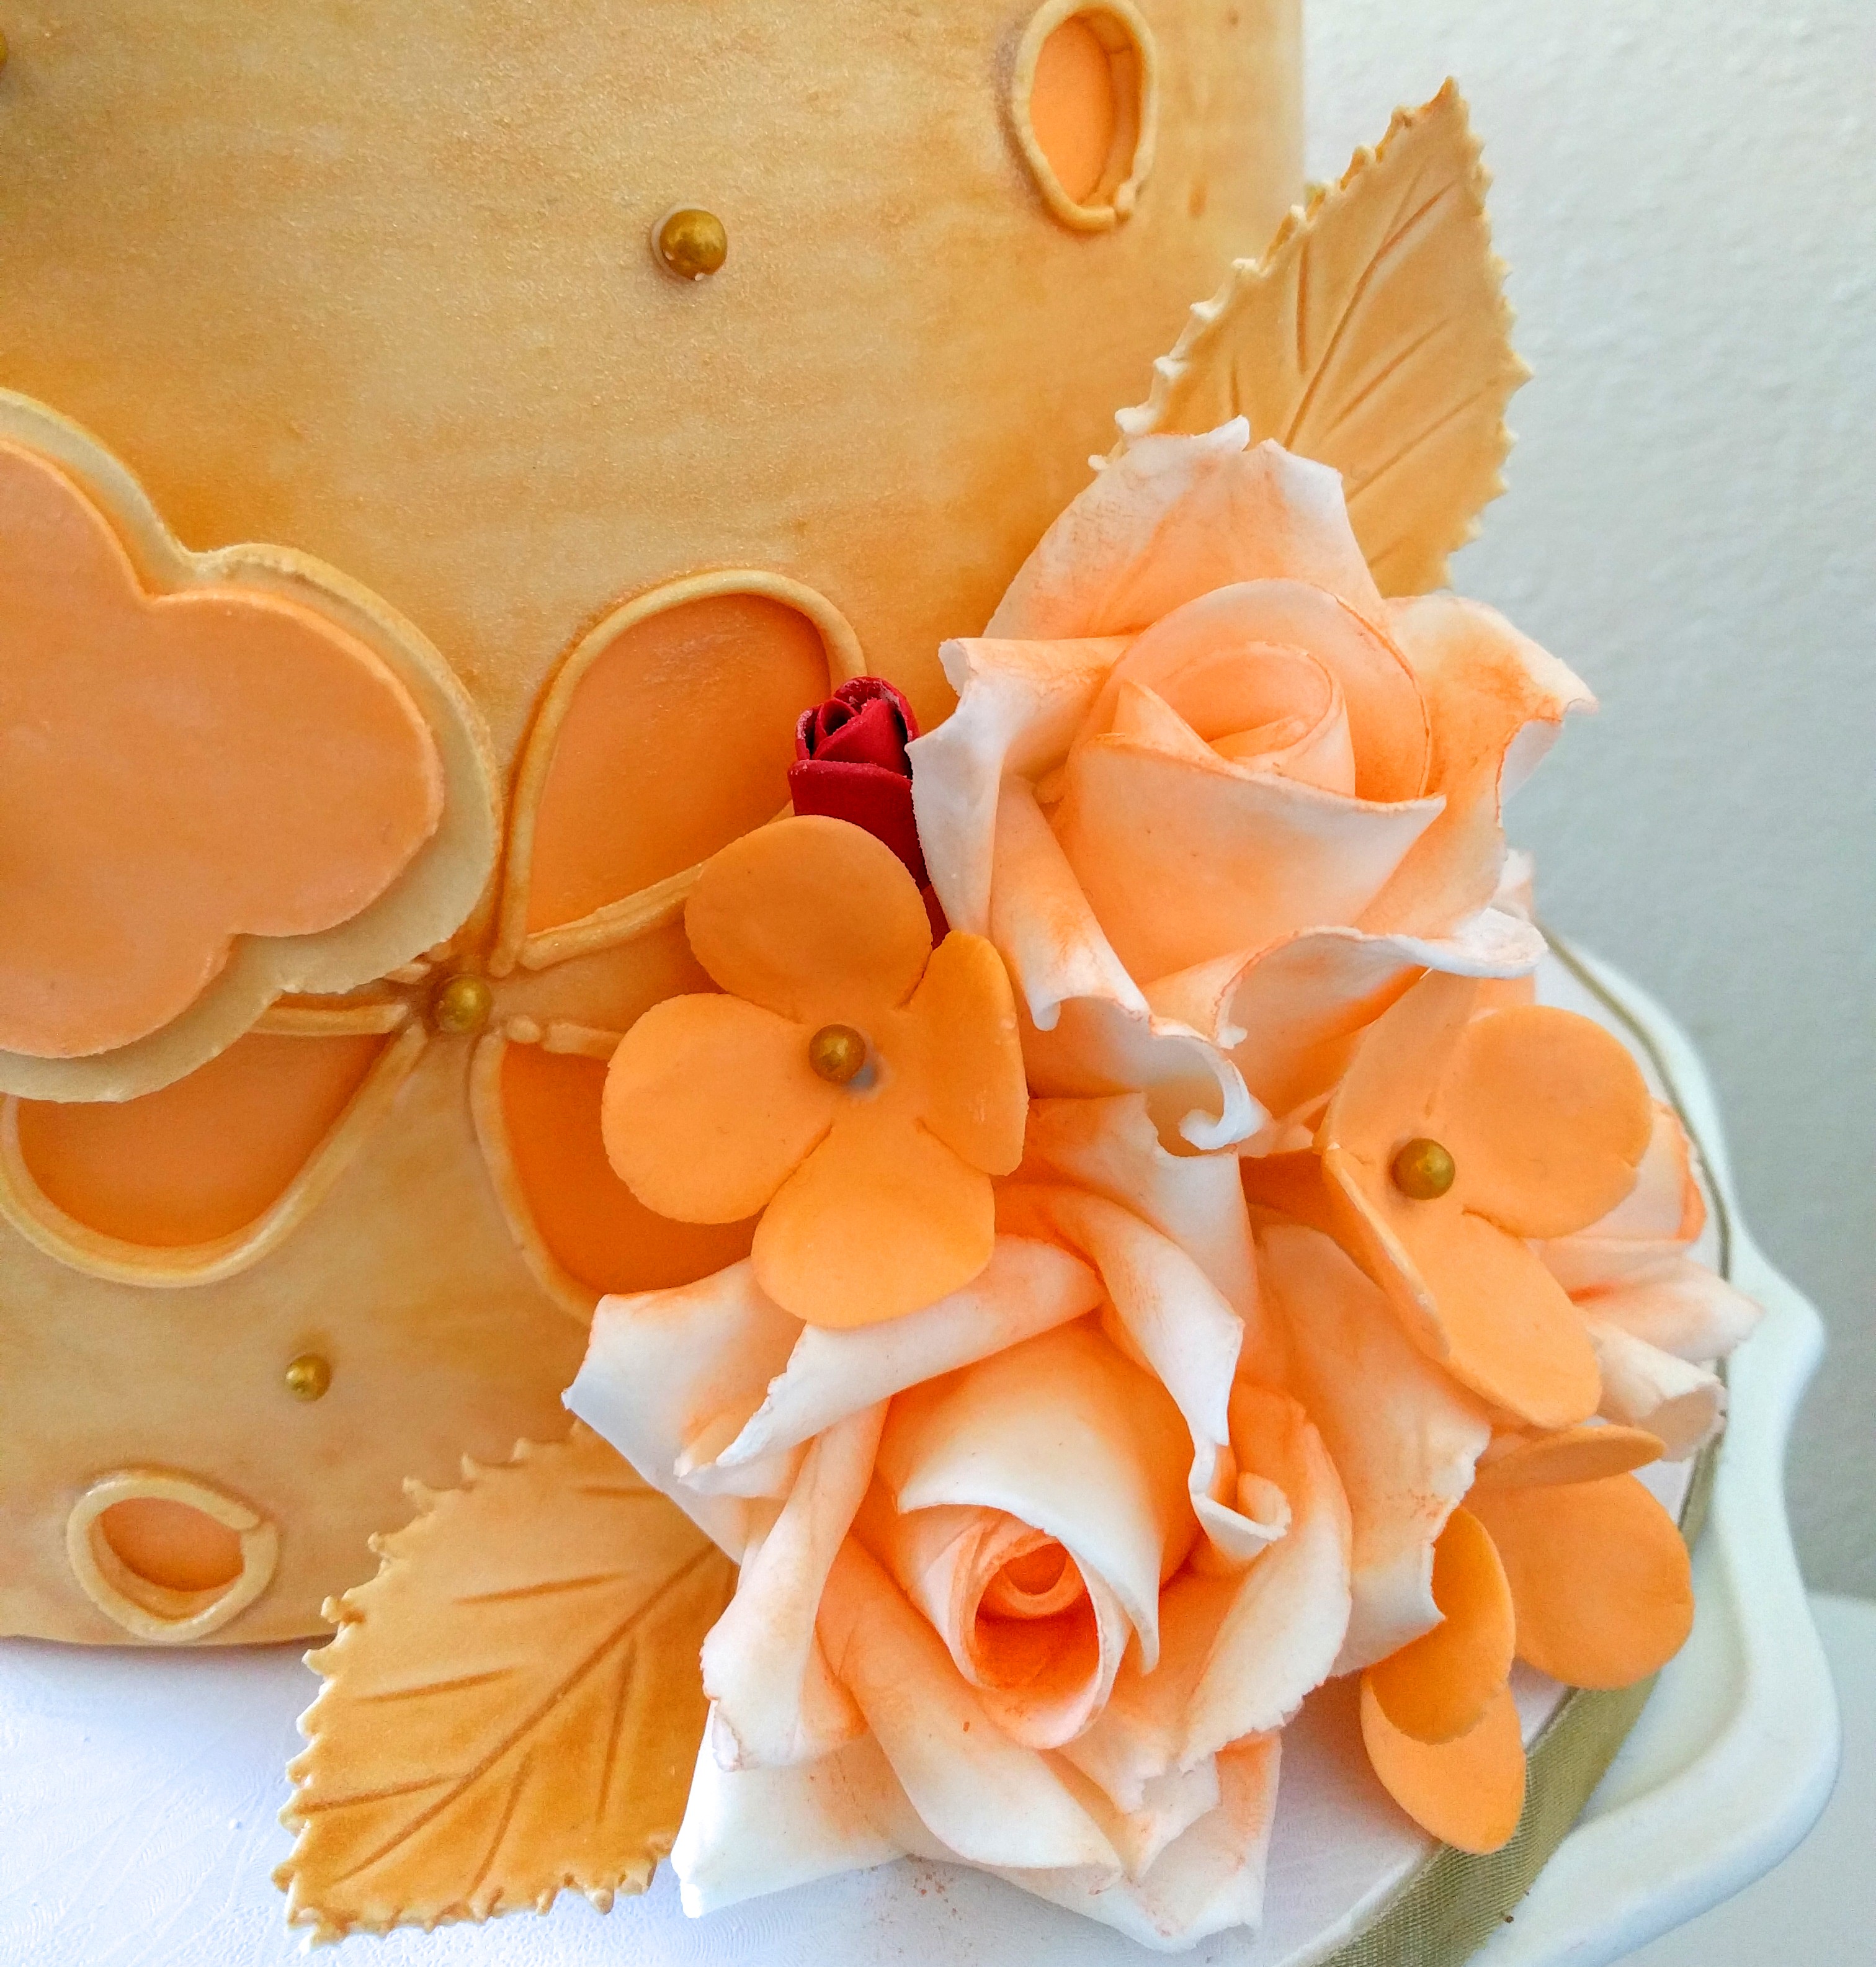 Fondant Blossom Flowers without Molds or Cutters